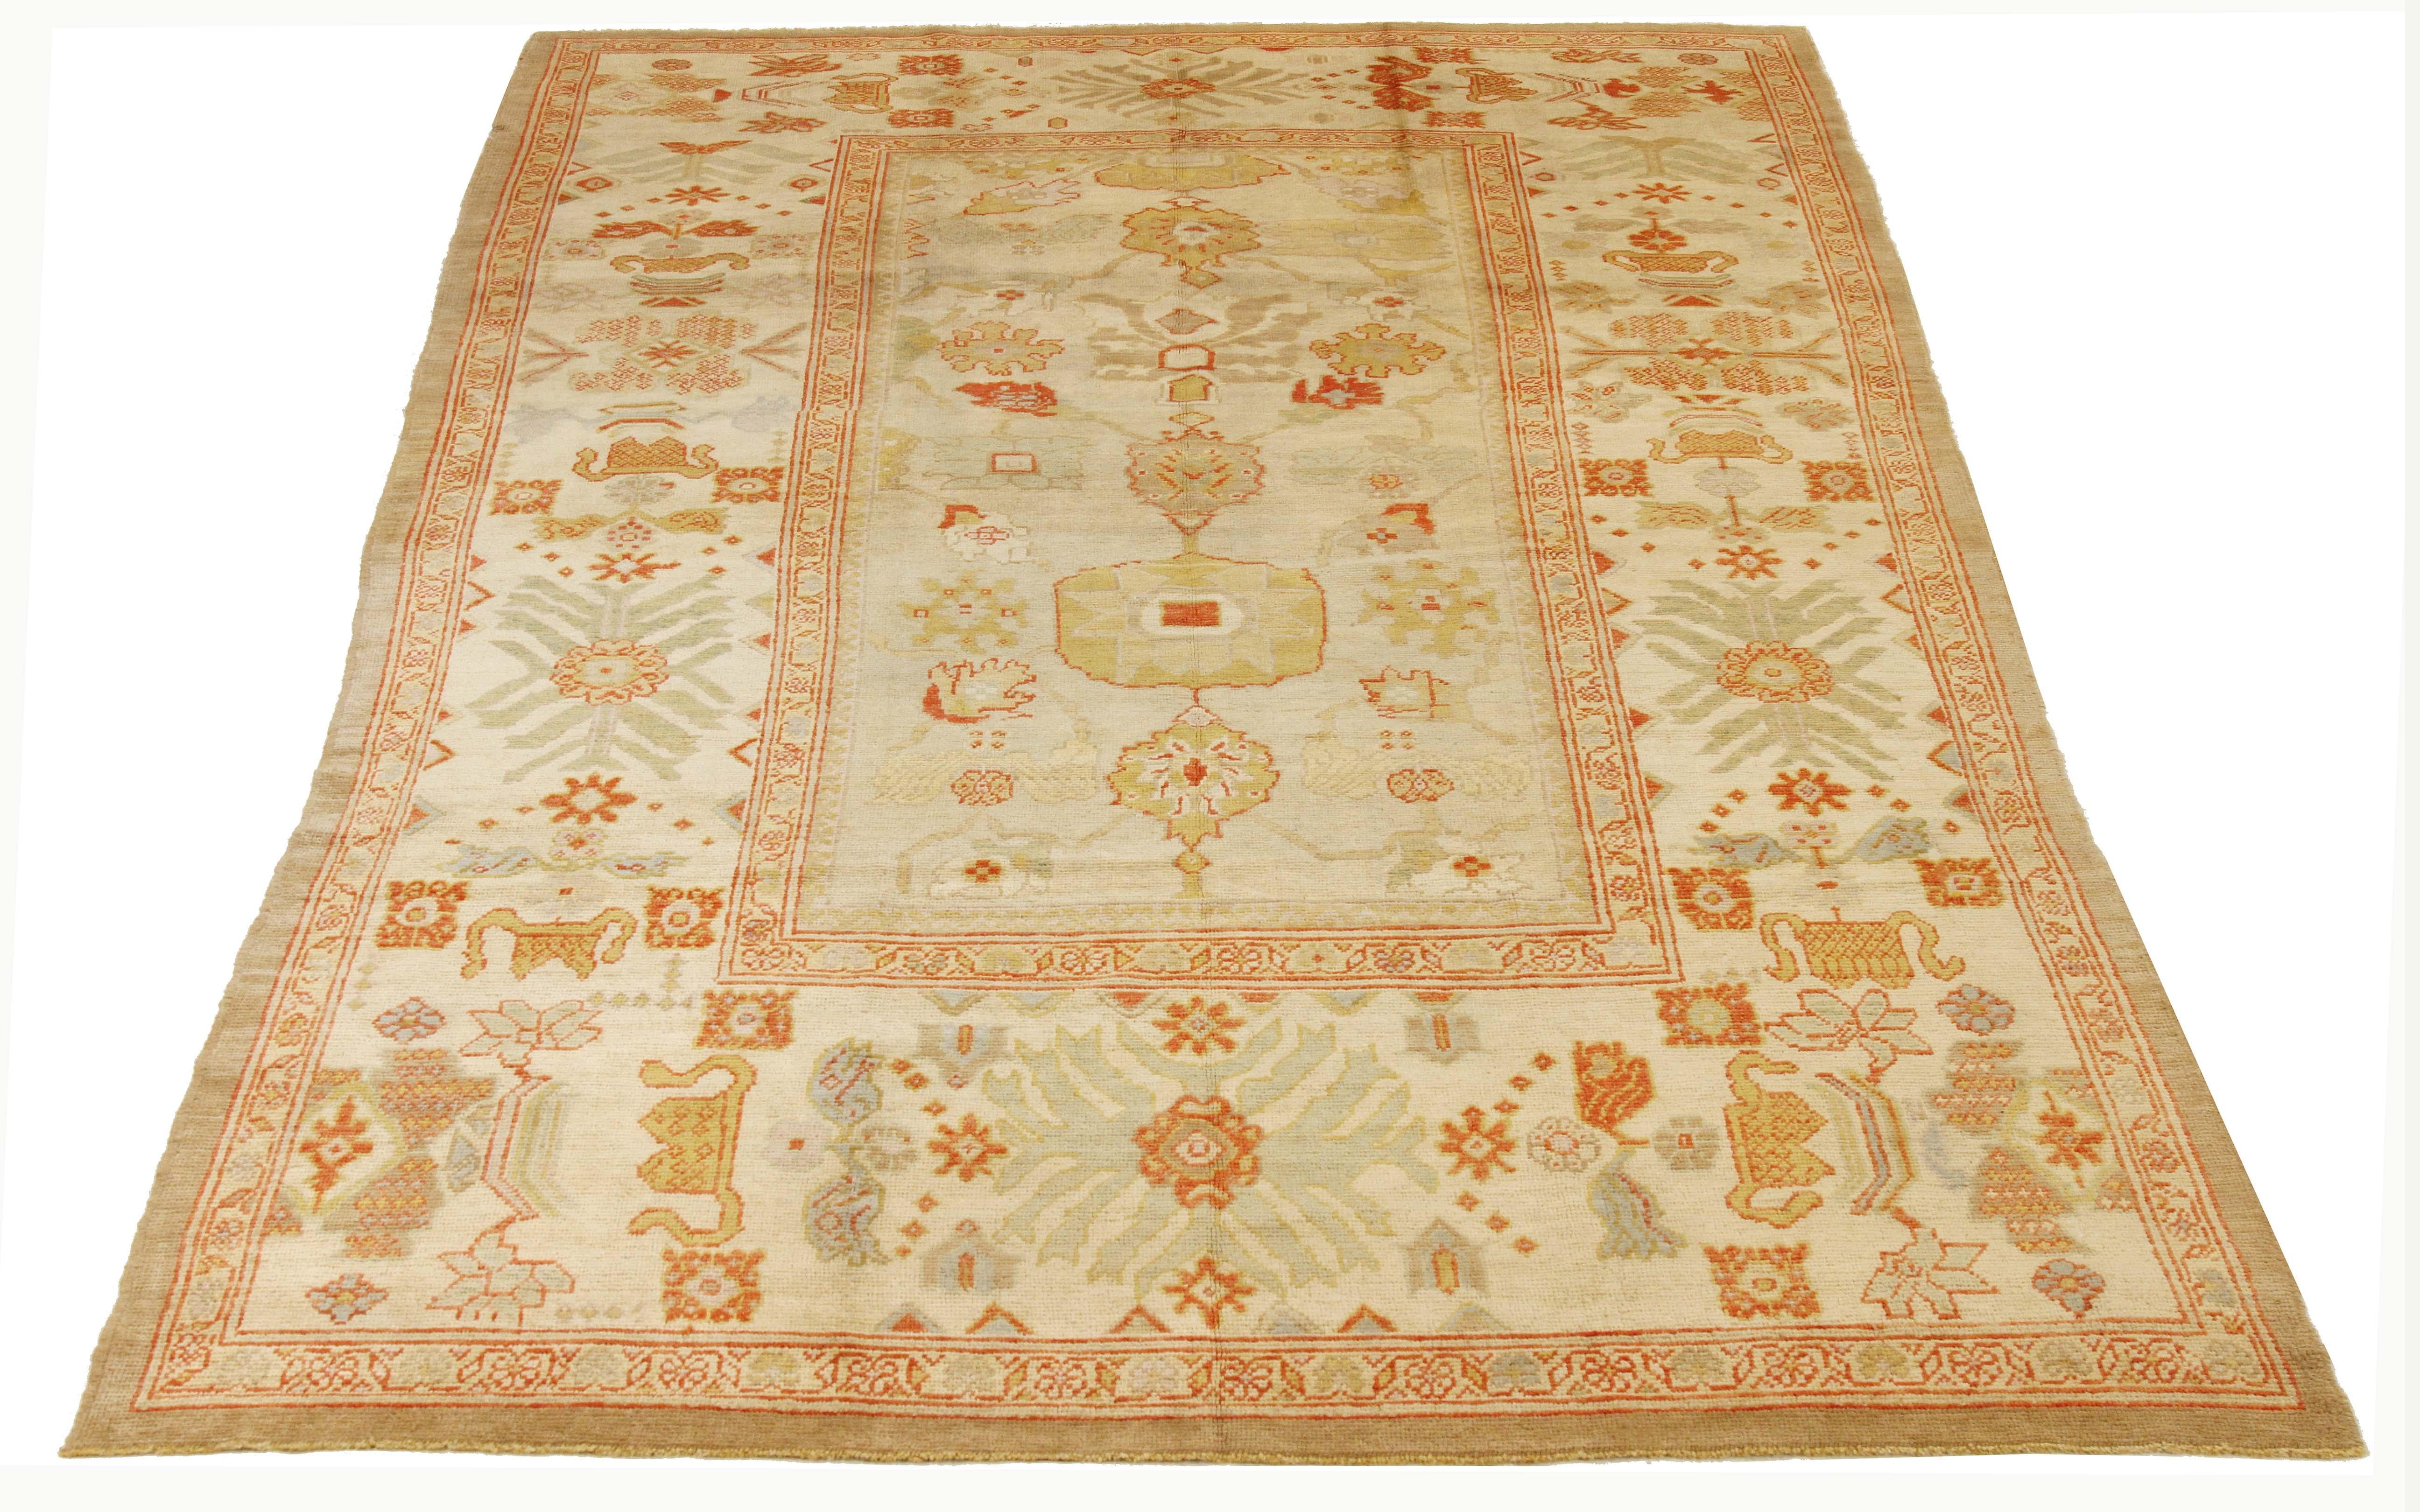 Contemporary Persian rug made of handwoven sheep’s wool of the finest quality. It’s colored with organic vegetable dyes that are certified safe for humans and pets alike. It features flower details all-over associated with Oushak weaving from